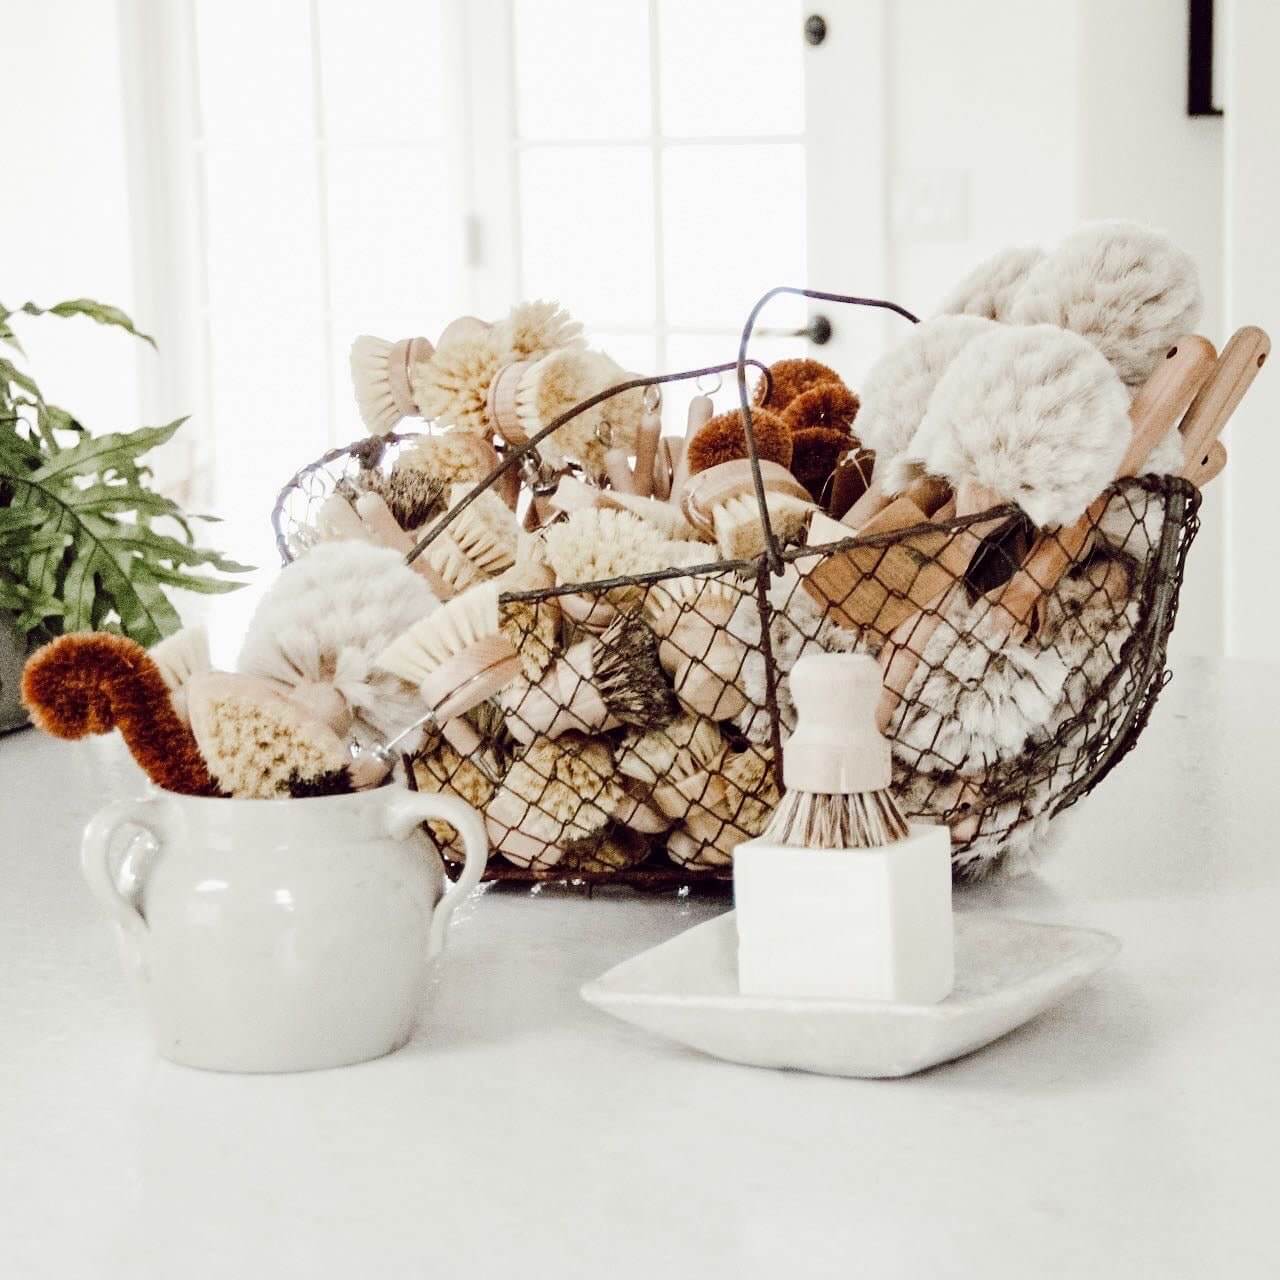 Cleaning Utensils & Accessories: A Collections of Dish Brushes, Soaps and Pot Scrubbers - Debra Hall Lifestyle